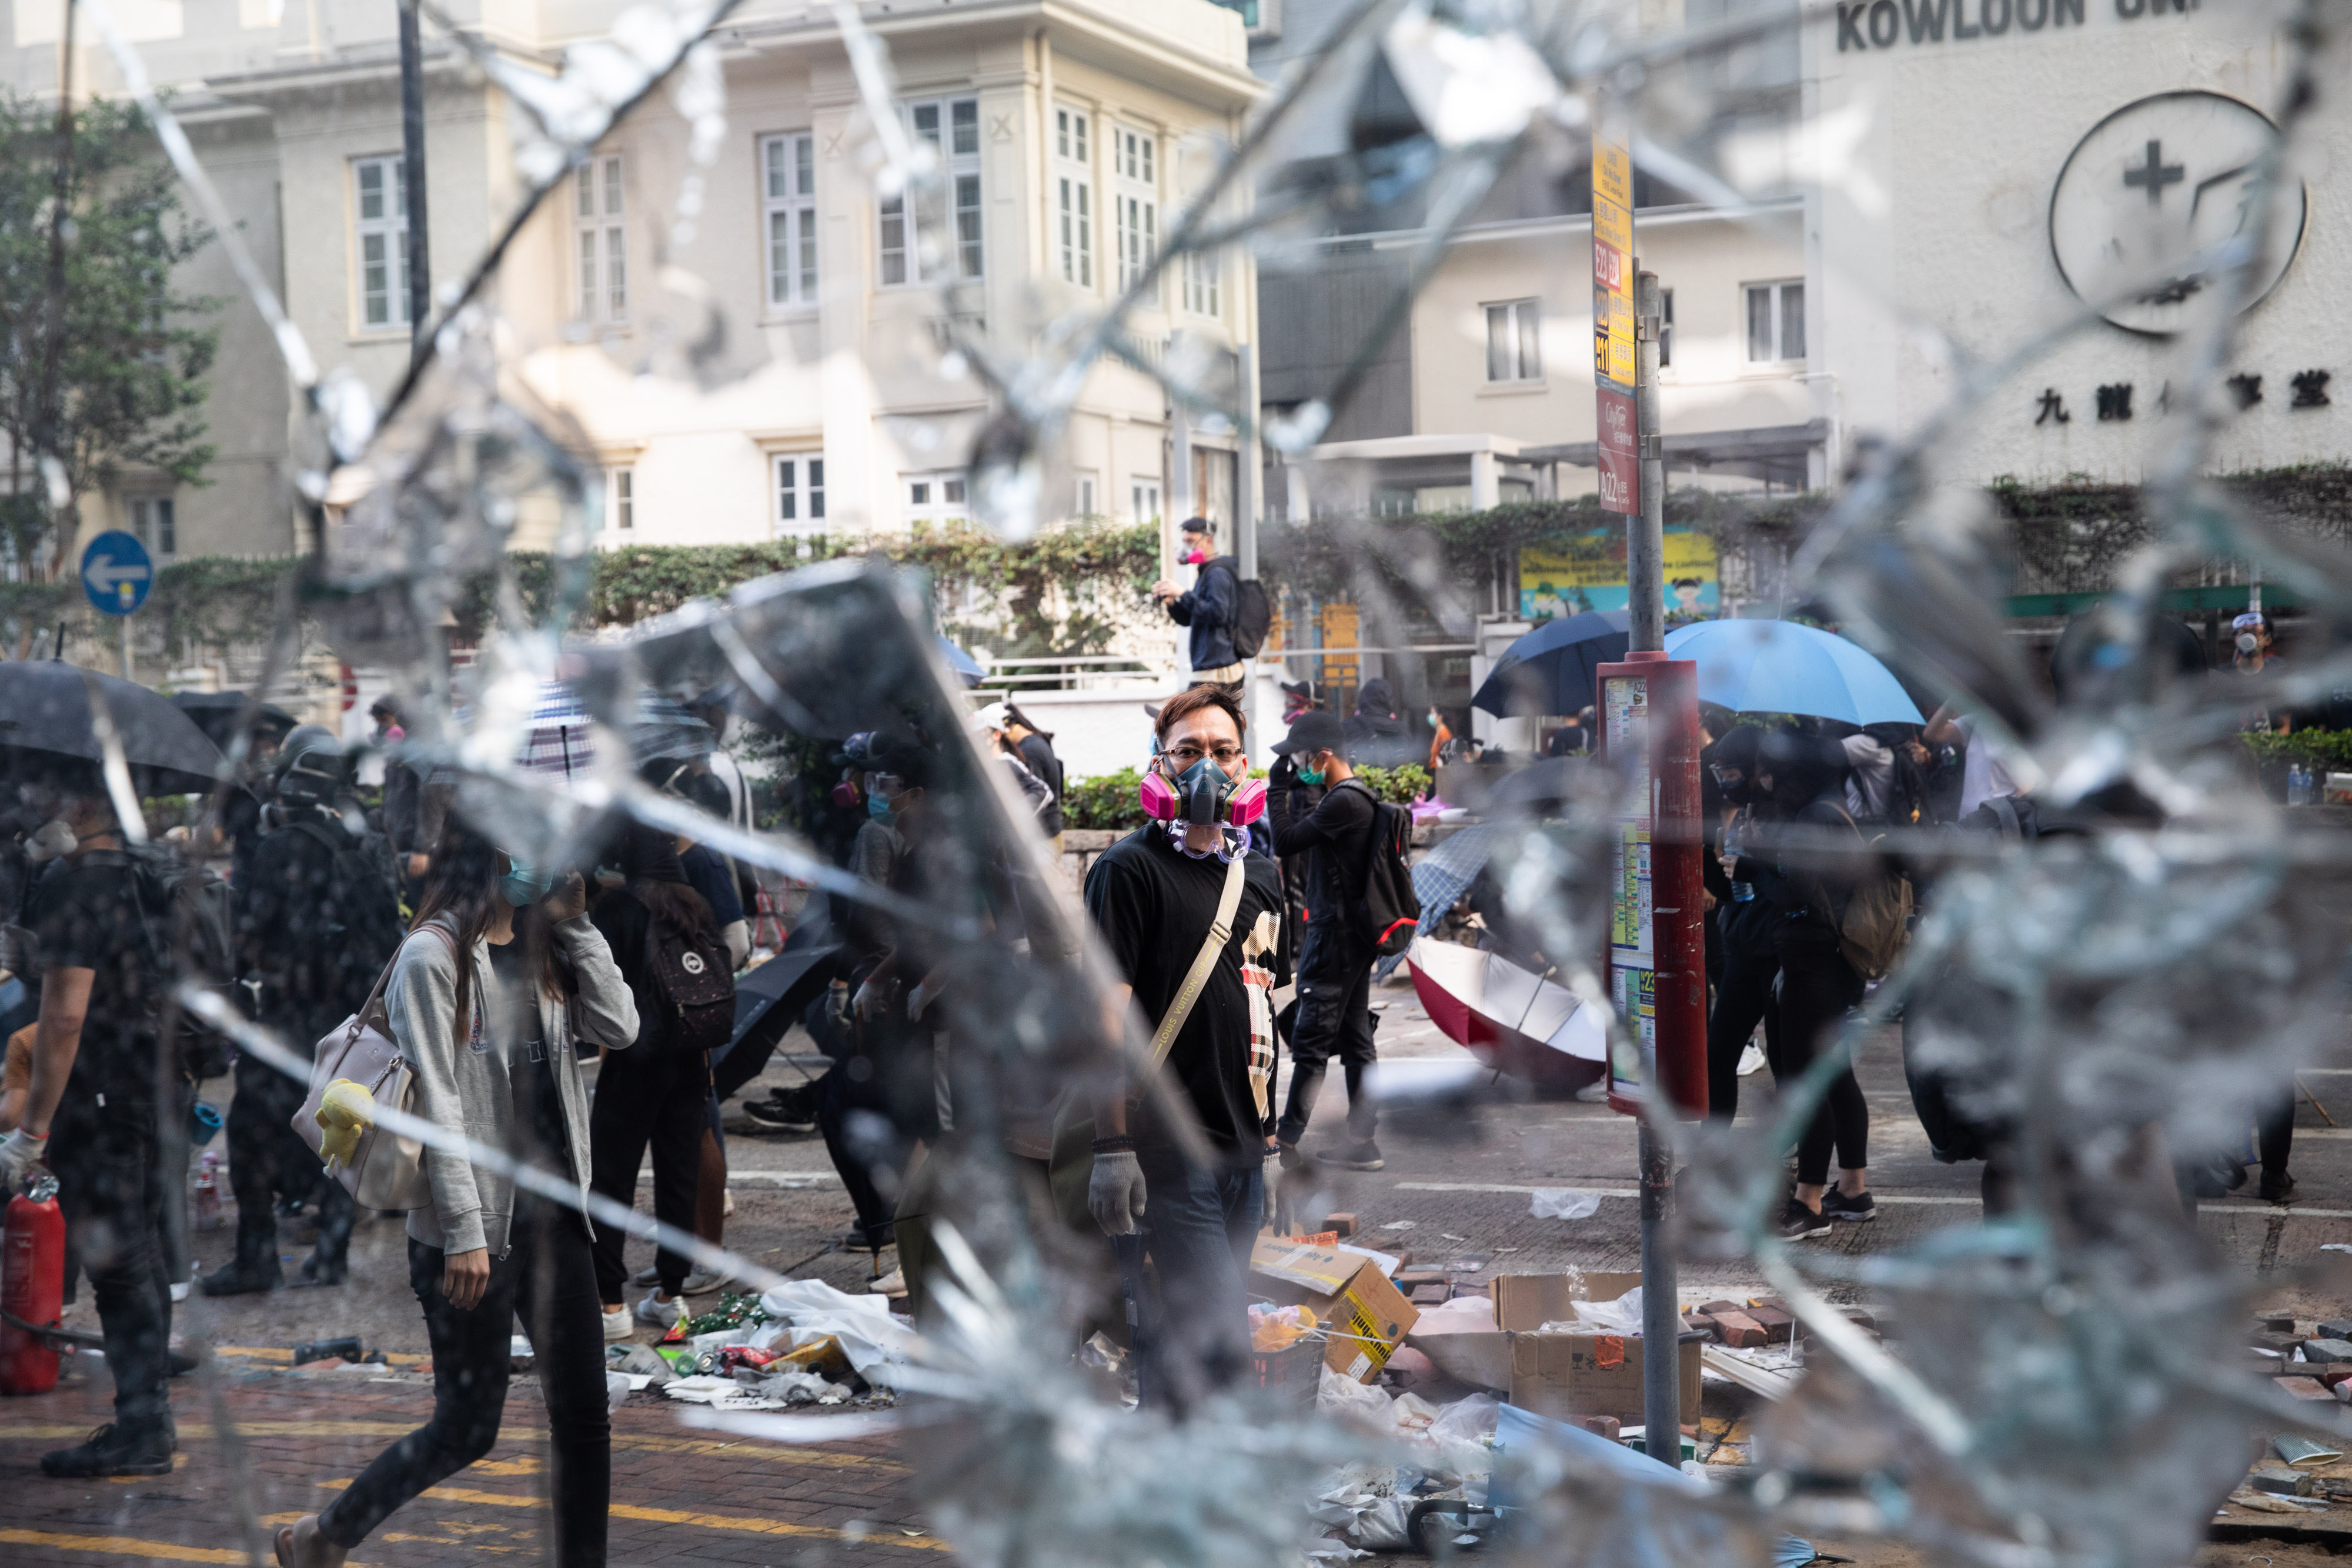 A protester stands in front of a broken pane of glass during a demonstration in Jordan district of Hong Kong, China, on Monday, Nov. 18, 2019. (Kyle Lam/Bloomberg via Getty Images)